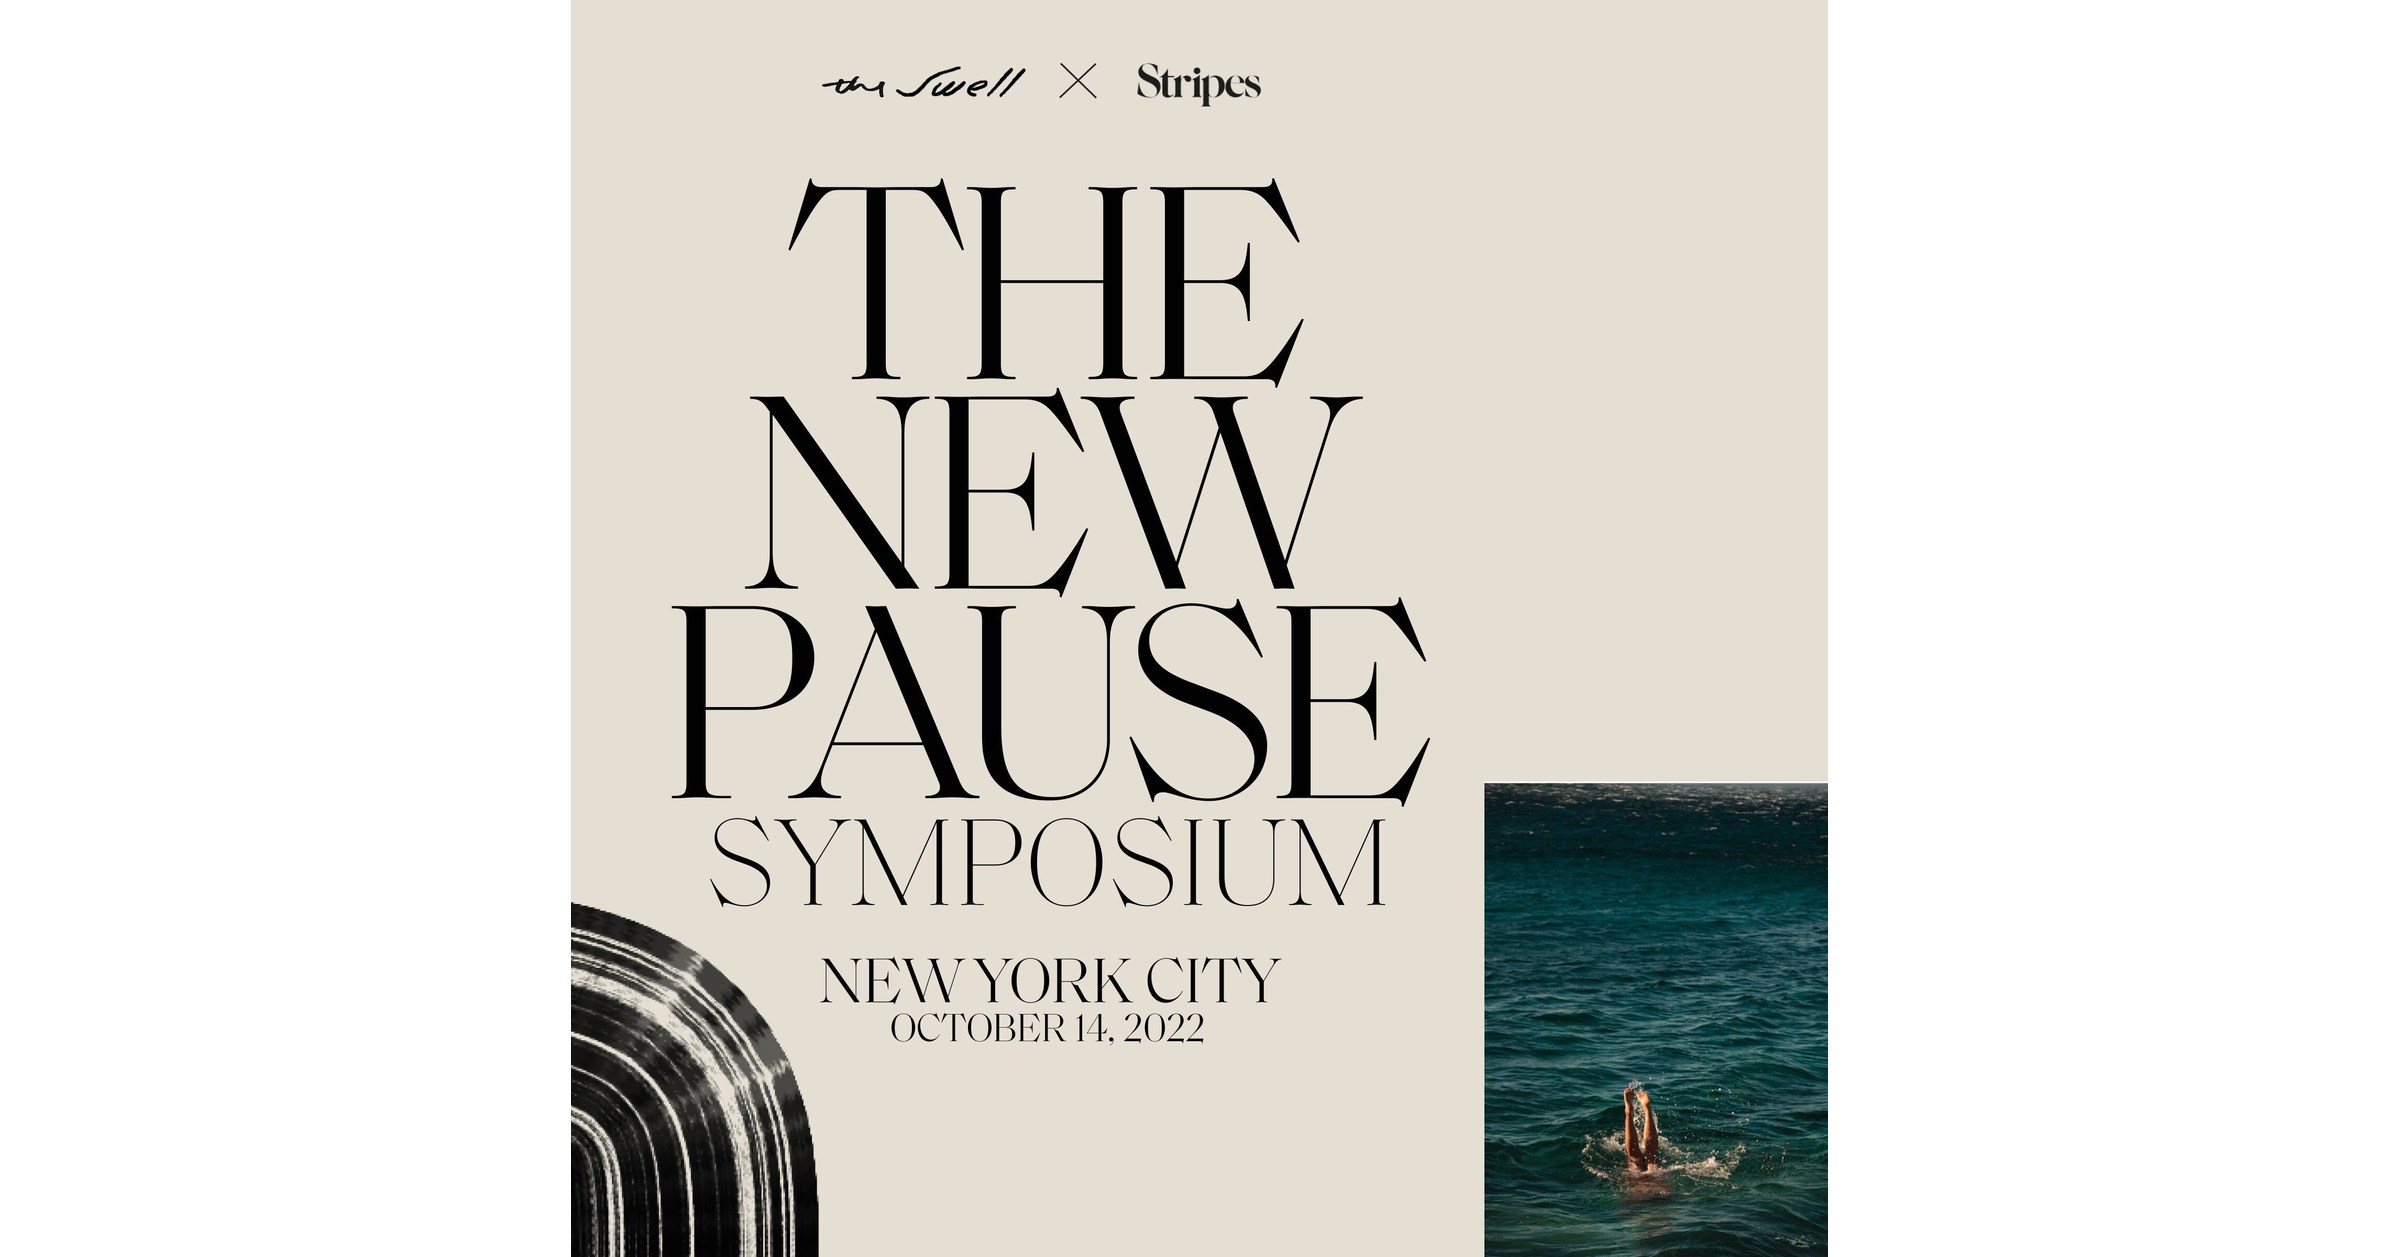 The Swell & Stripes Announce Menopause Symposium in New York